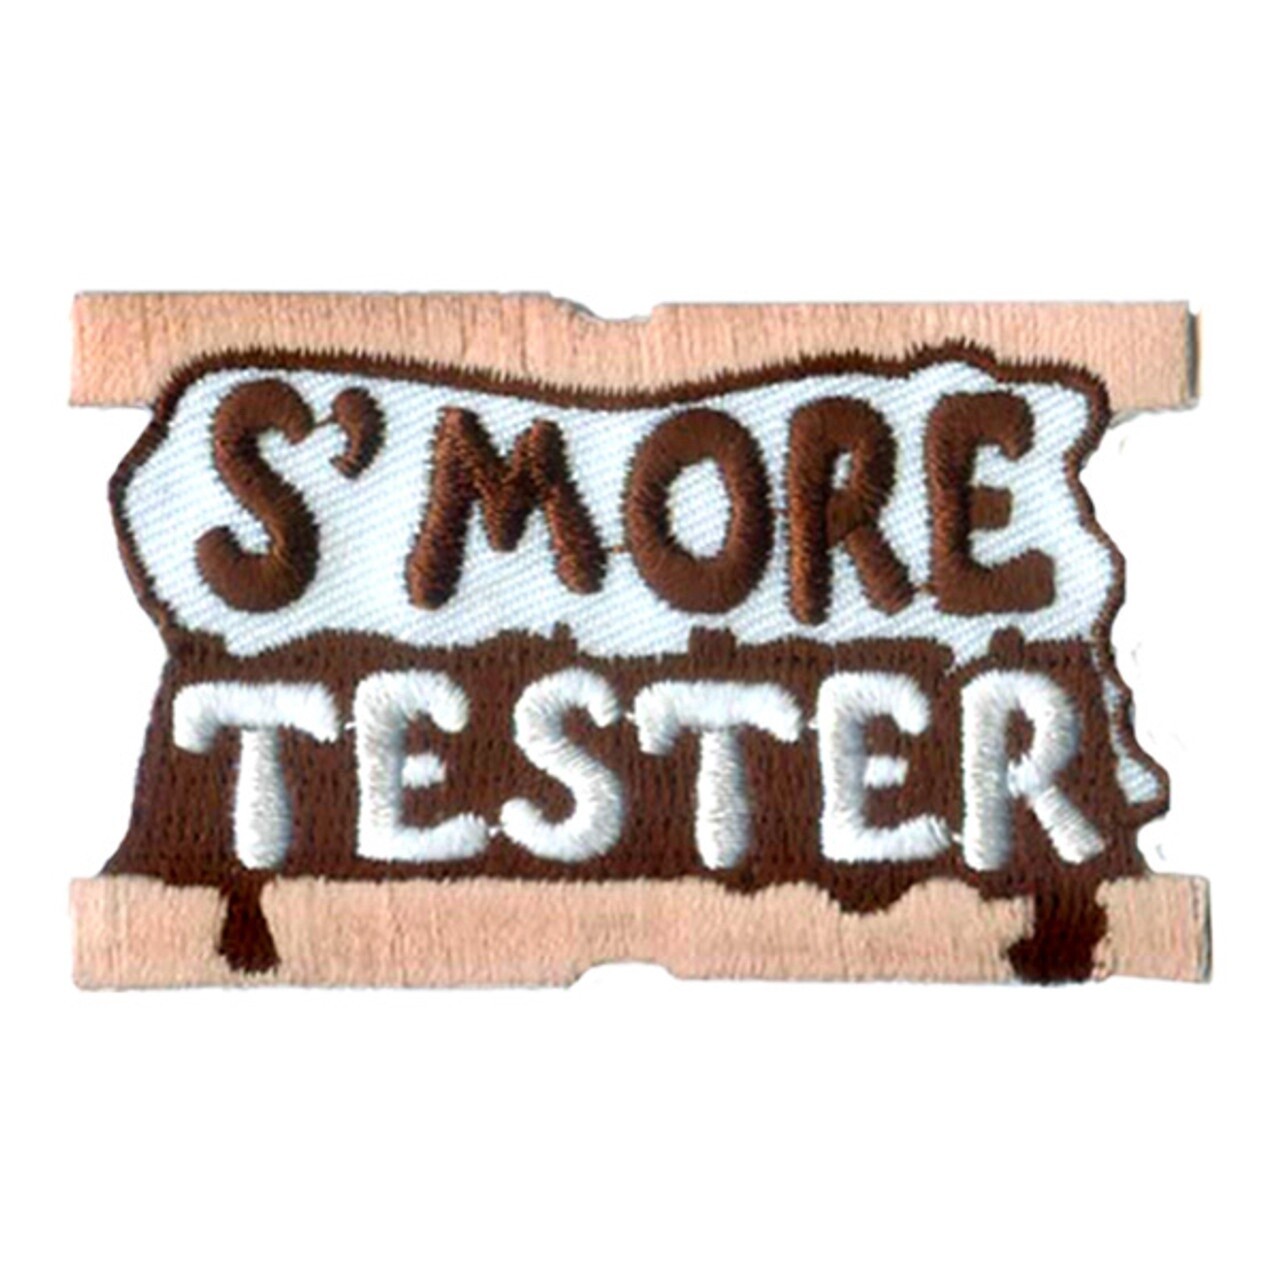 S'more Tester Patch